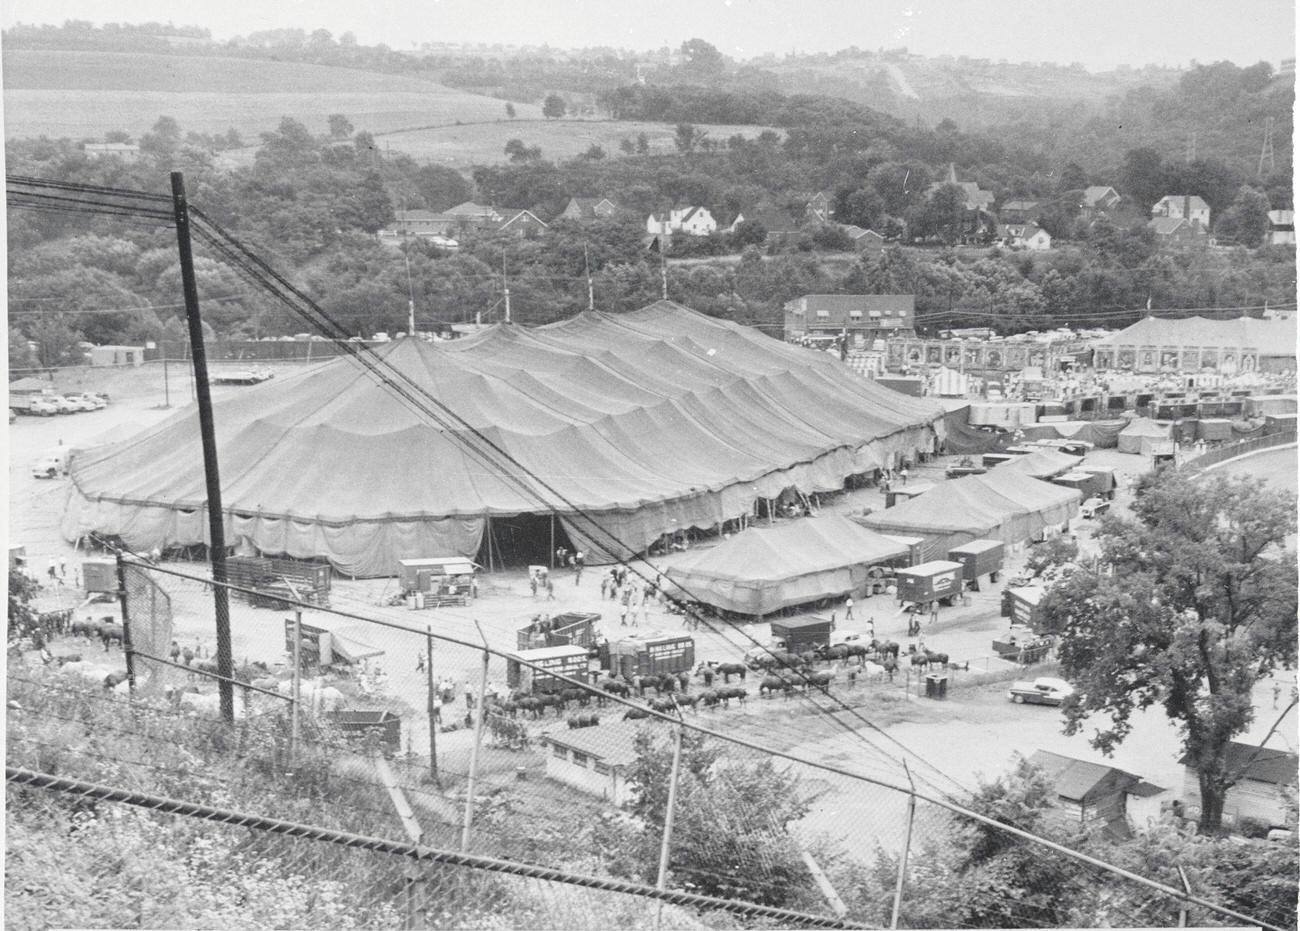 Ringling Brothers Circus Ends Run, Big Top Pictured in Pittsburgh, 1956